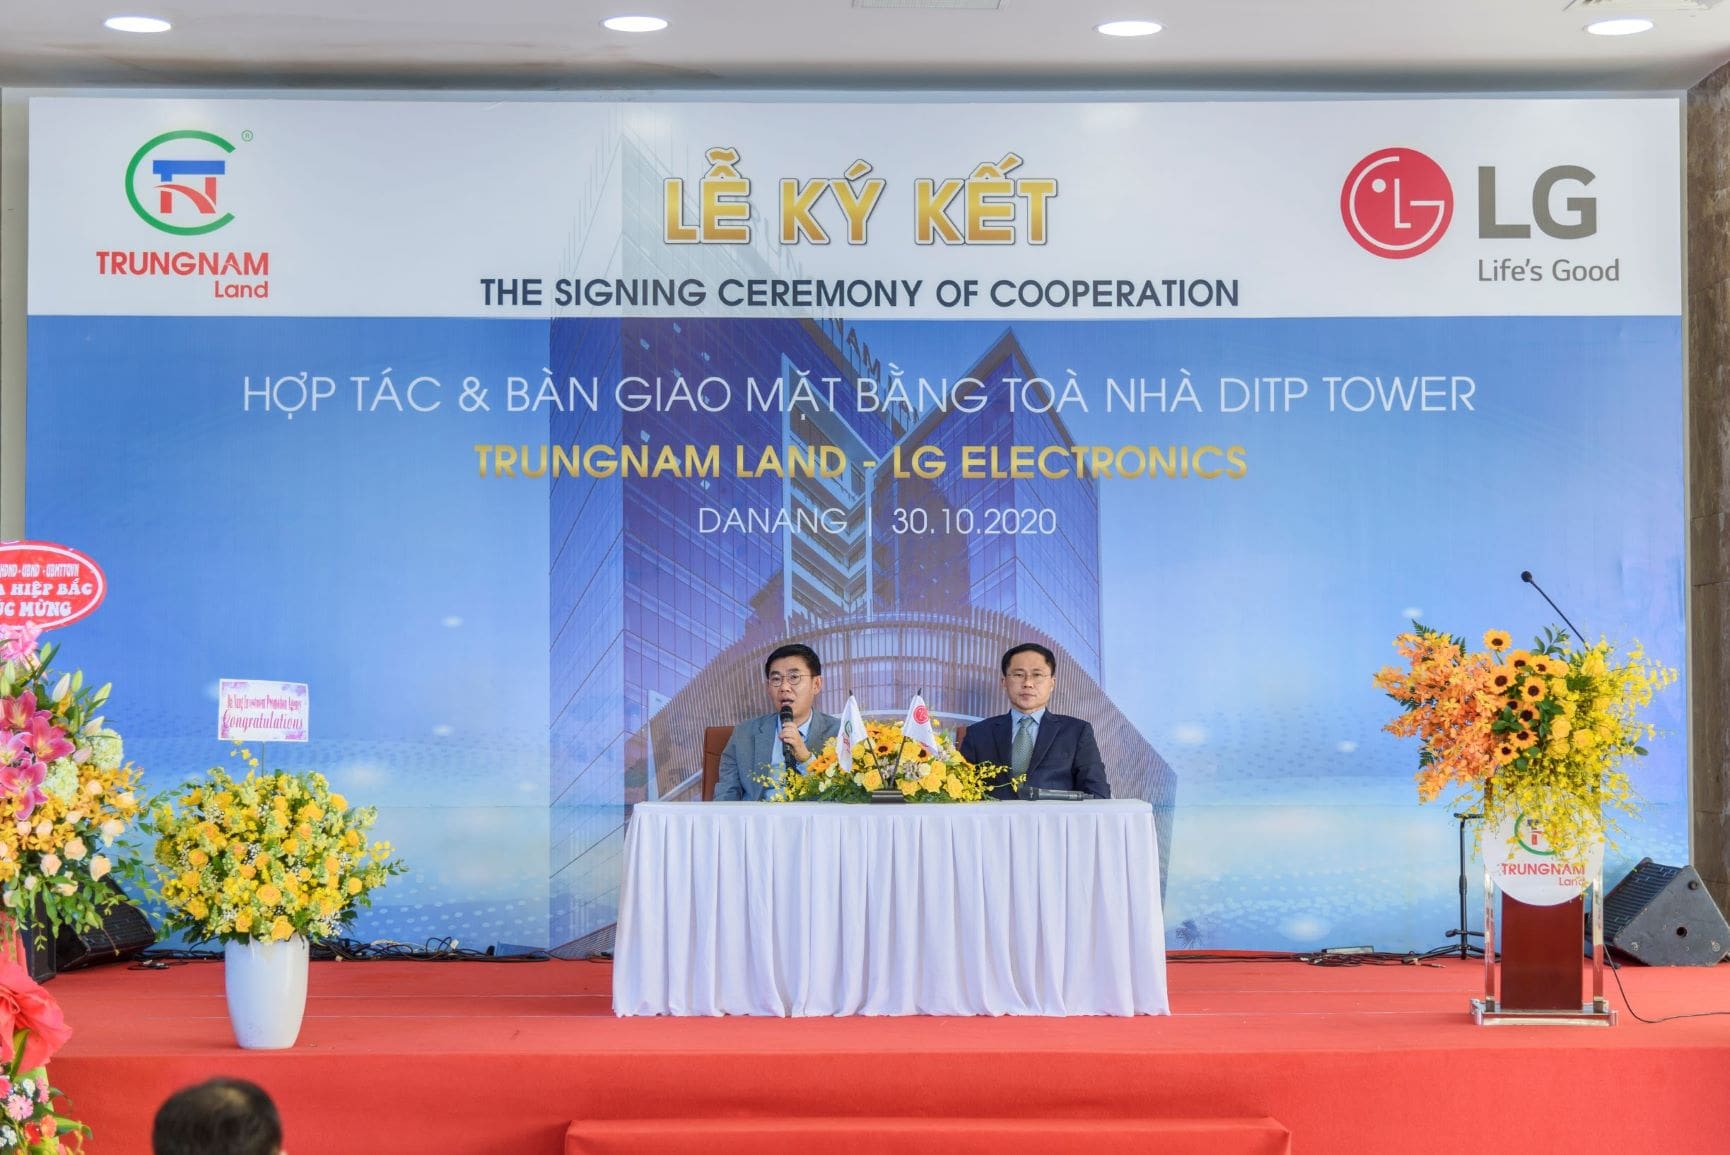 LG Electronics Vietnam officially signed contract to open a Research & Development (R&D) Center at DITP Tower in Da Nang